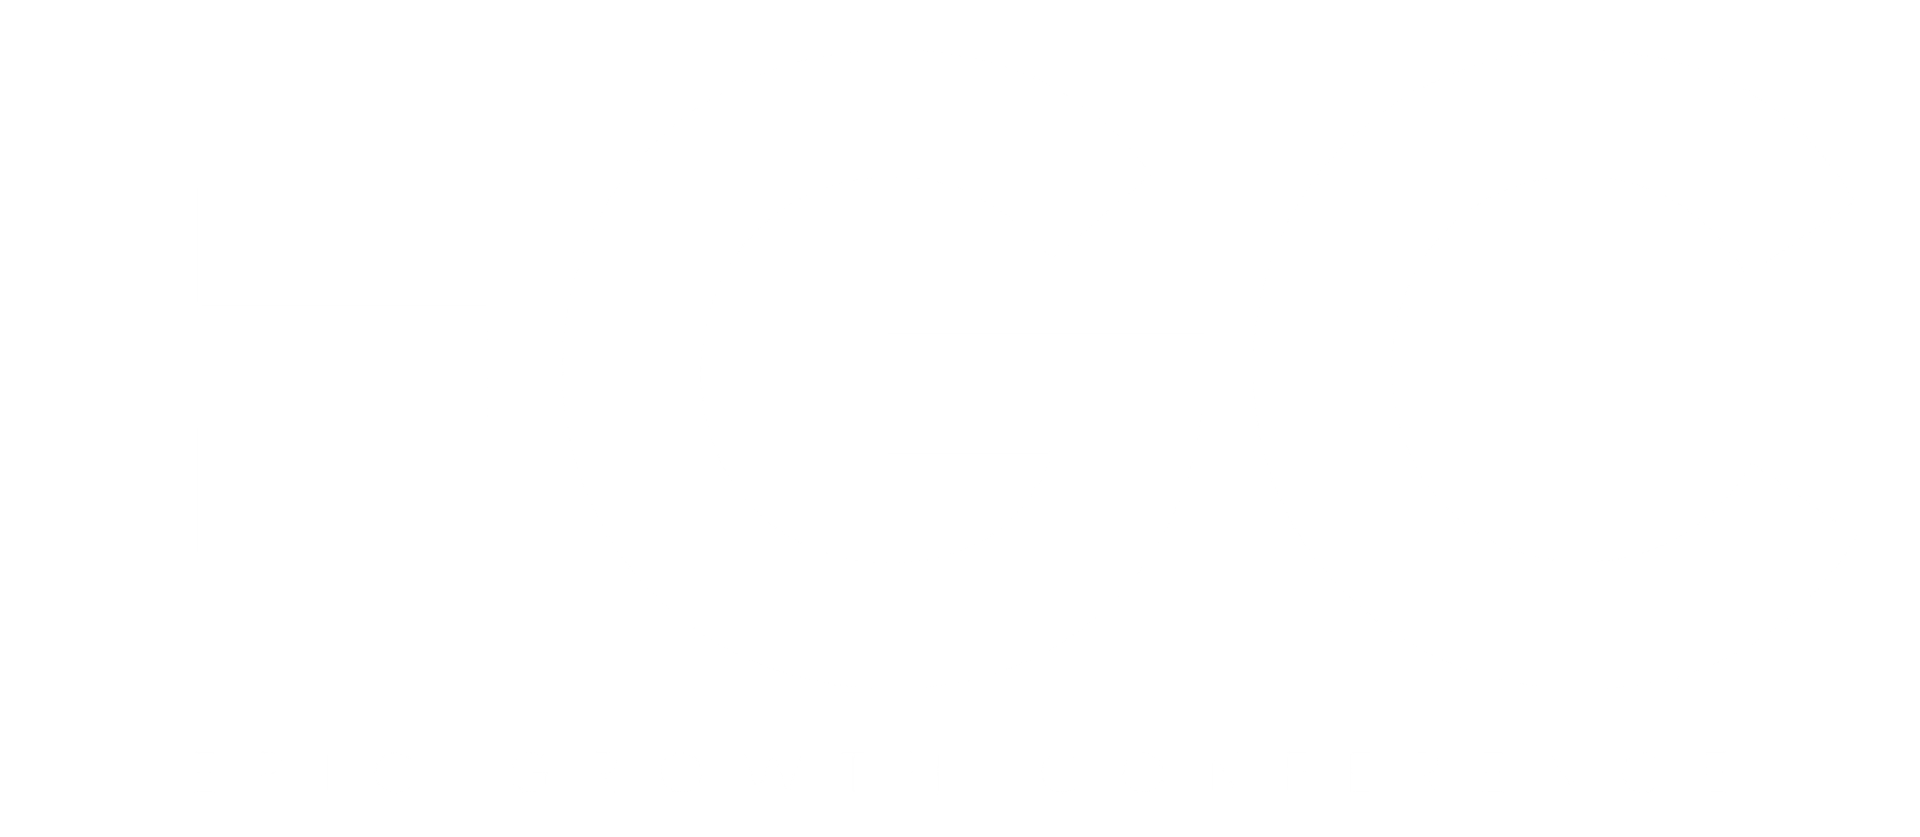 epic growth conference logo